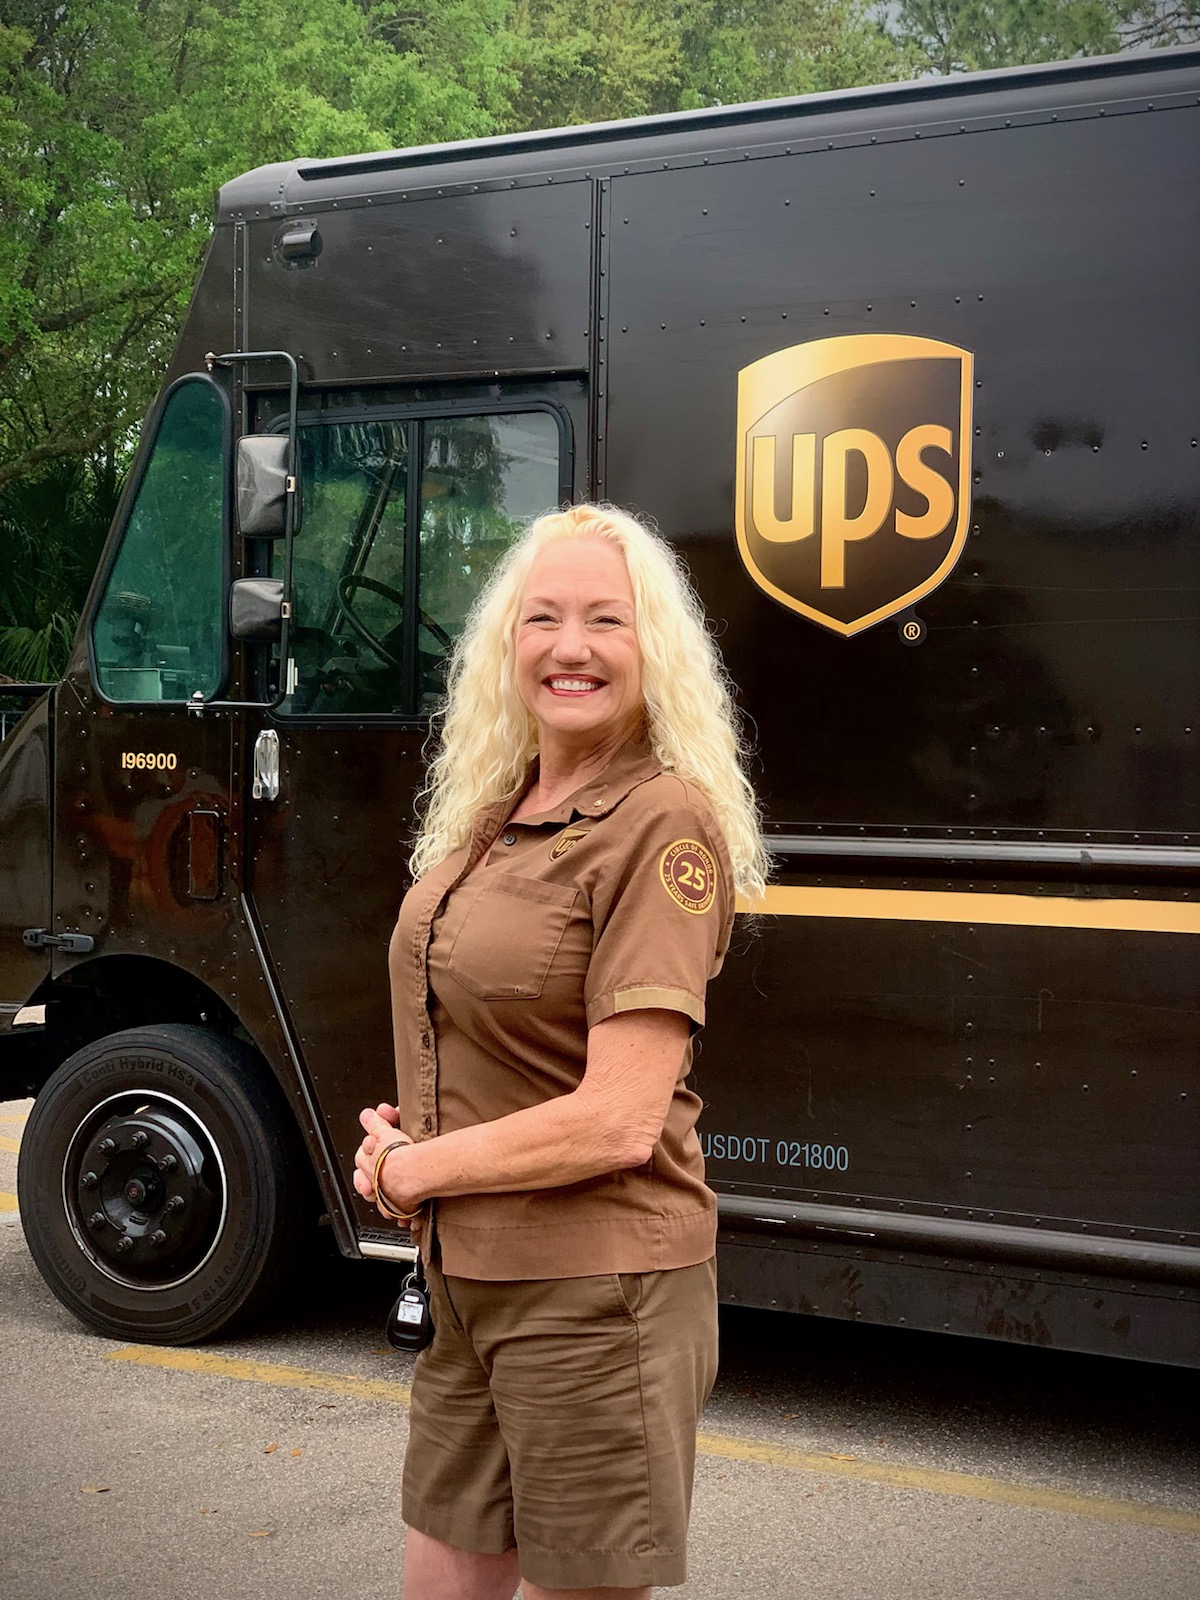 Daytona's first female UPS driver delivers packages for 28 years